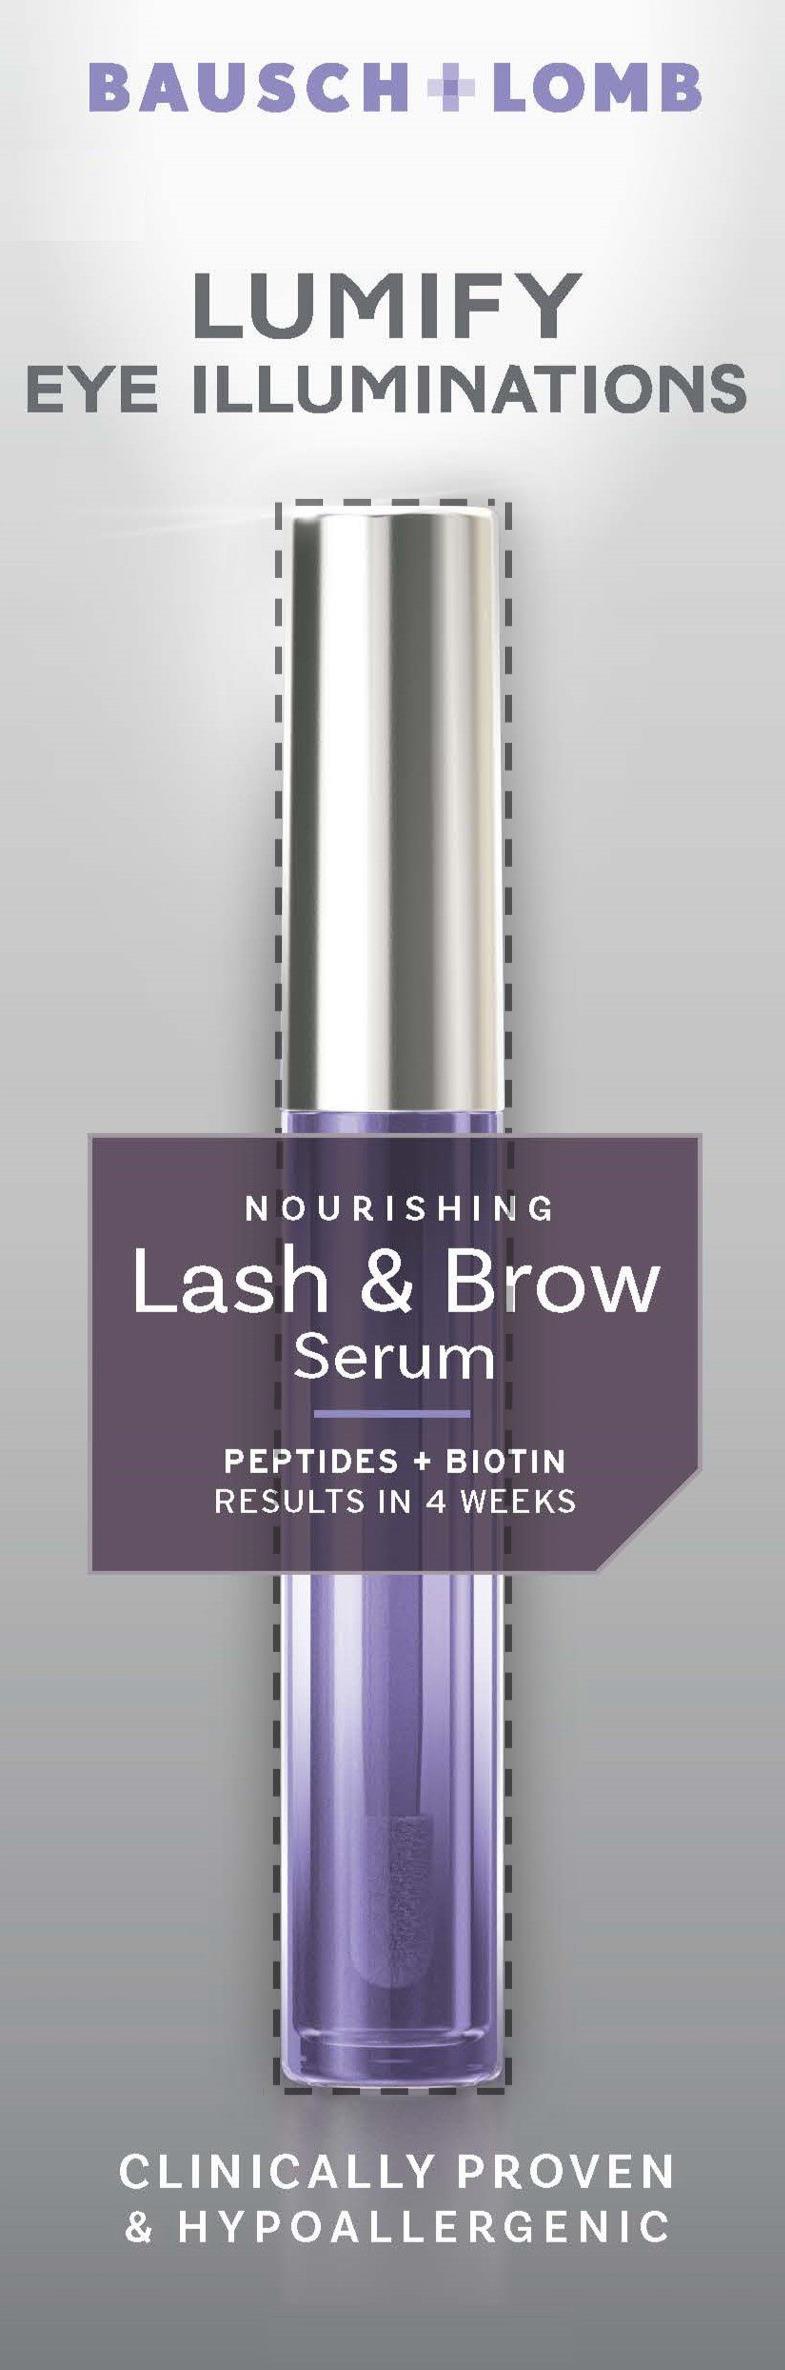  BAUSCH + LOMB LUMIFY EYE ILLUMINATIONS NOURISHING LASH &amp; BROW SERUM PEPTIDES + BIOTIN RESULTS IN 4 WEEKS CLINICALLY PROVEN &amp; HYPOALLERGENIC